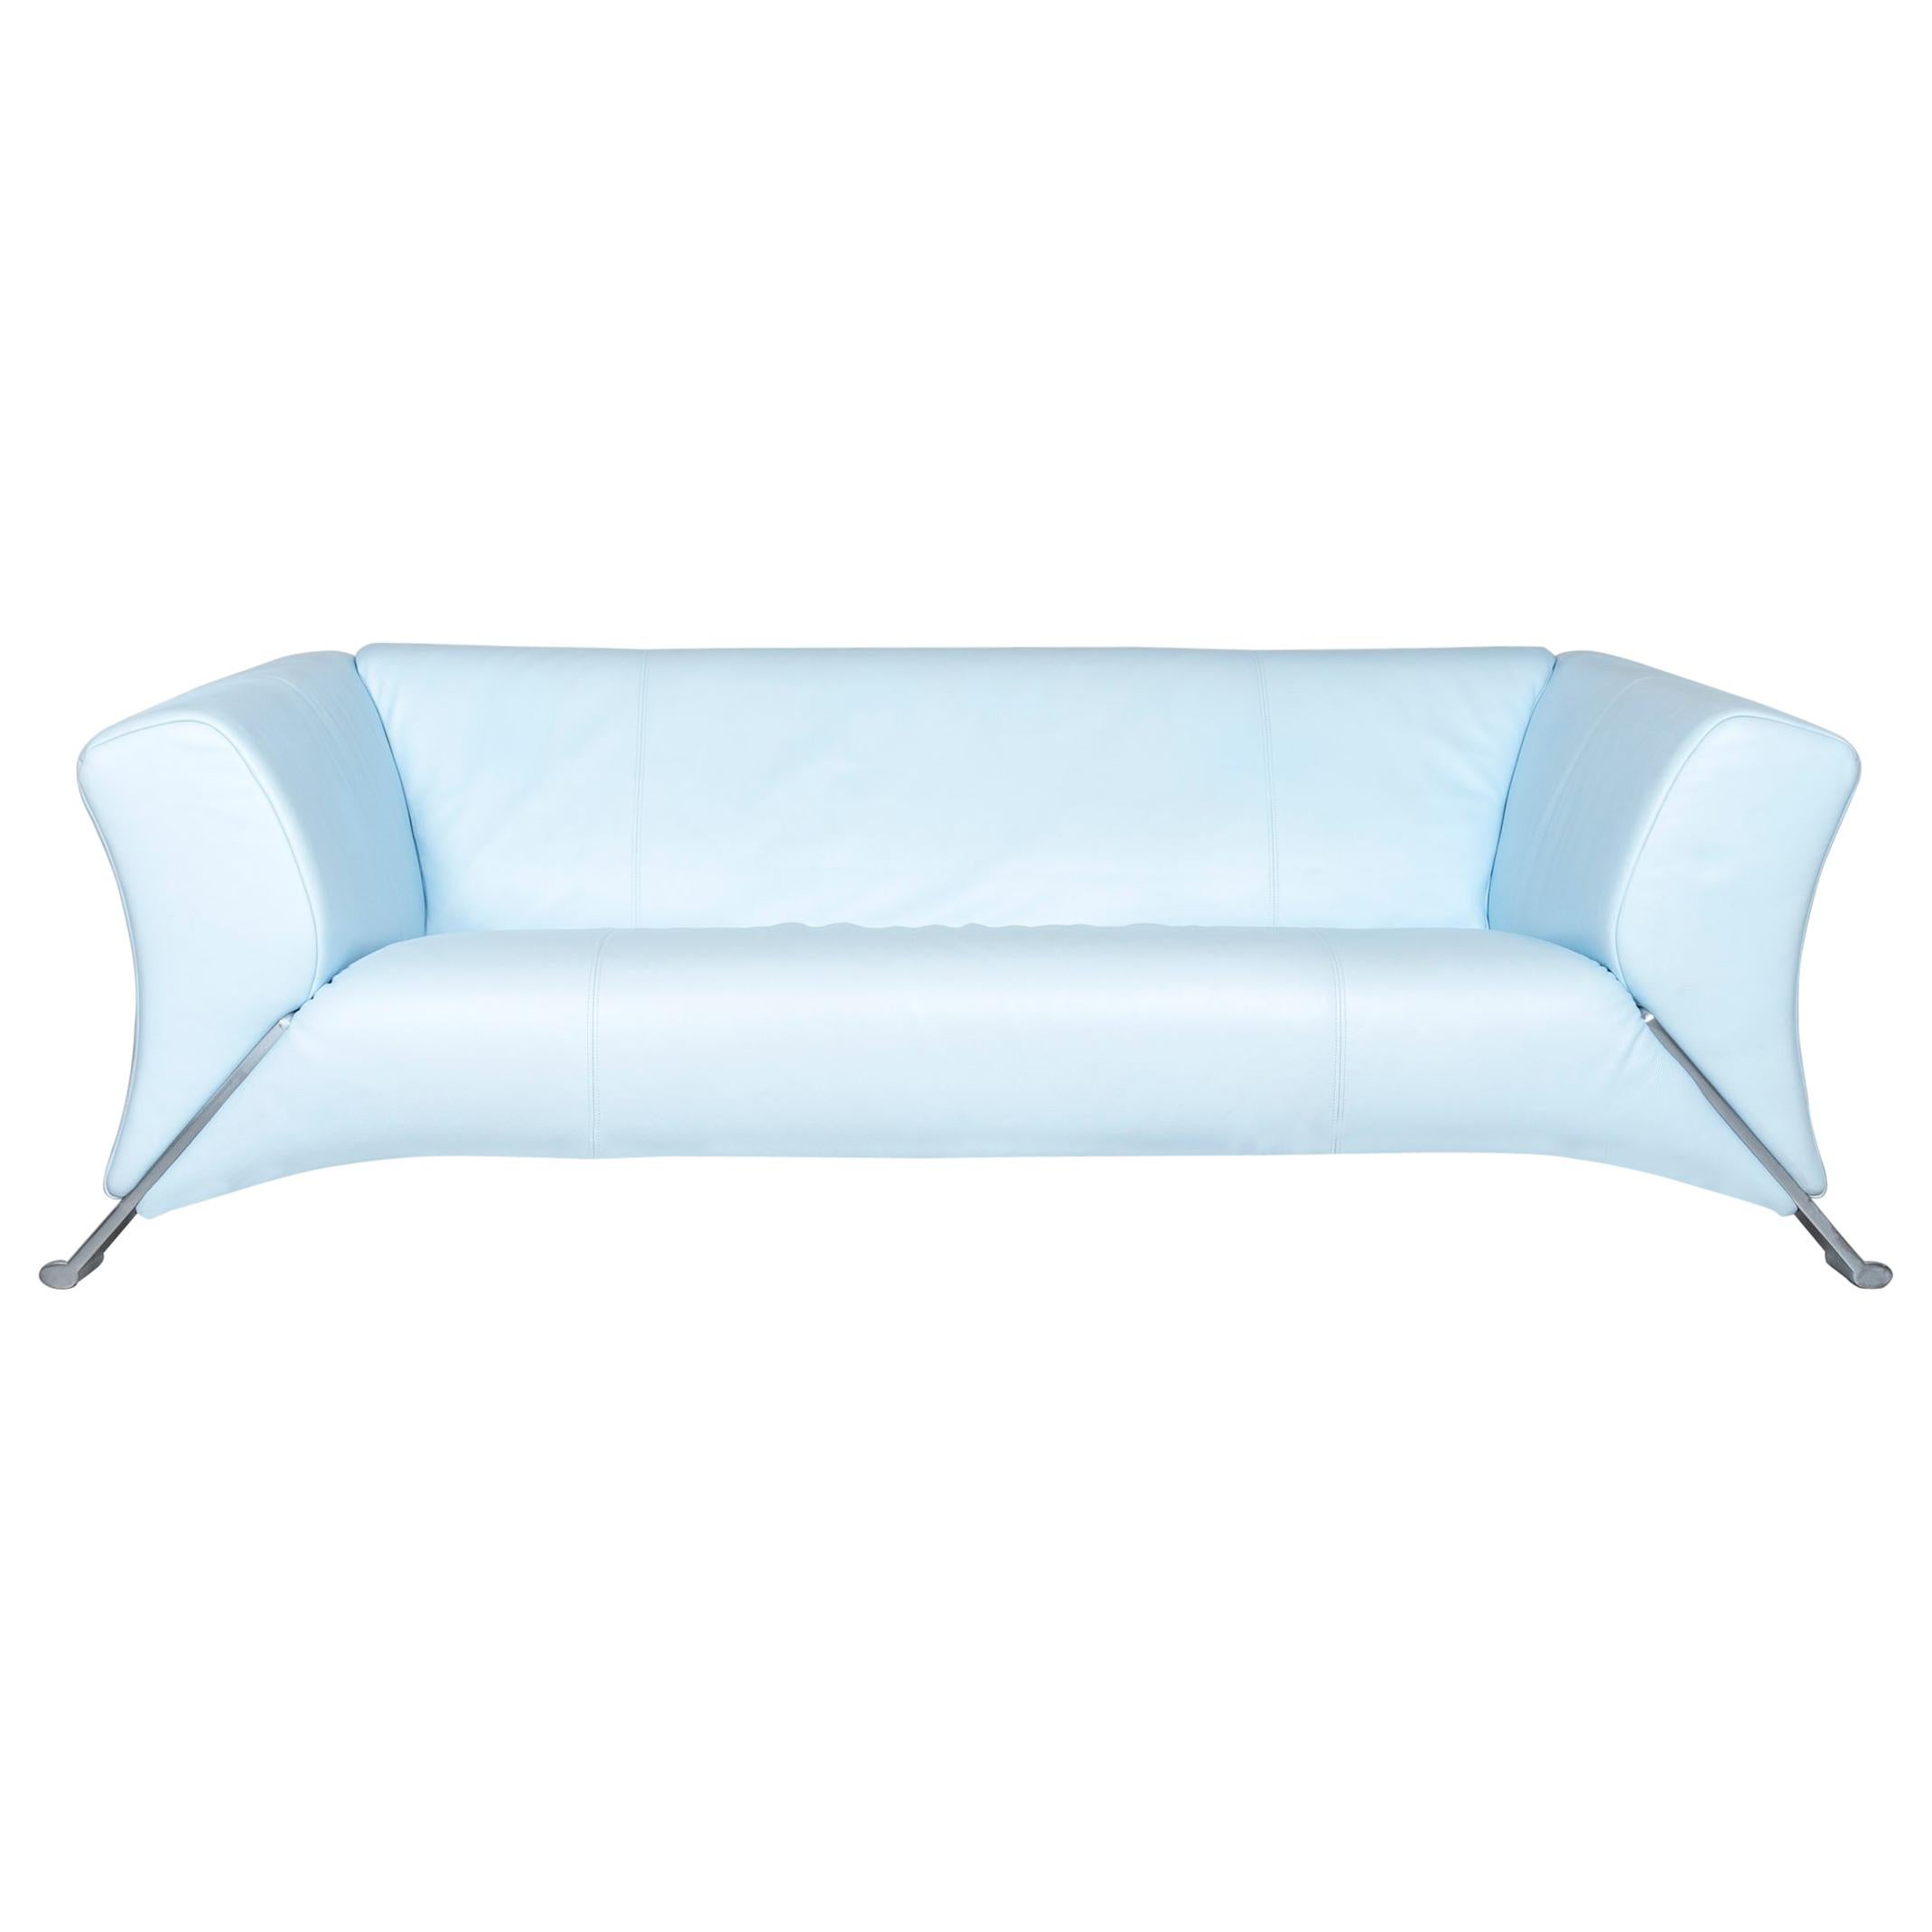 Rolf Benz 322 Designer Sofa Blue Two-Seat Leather Couch